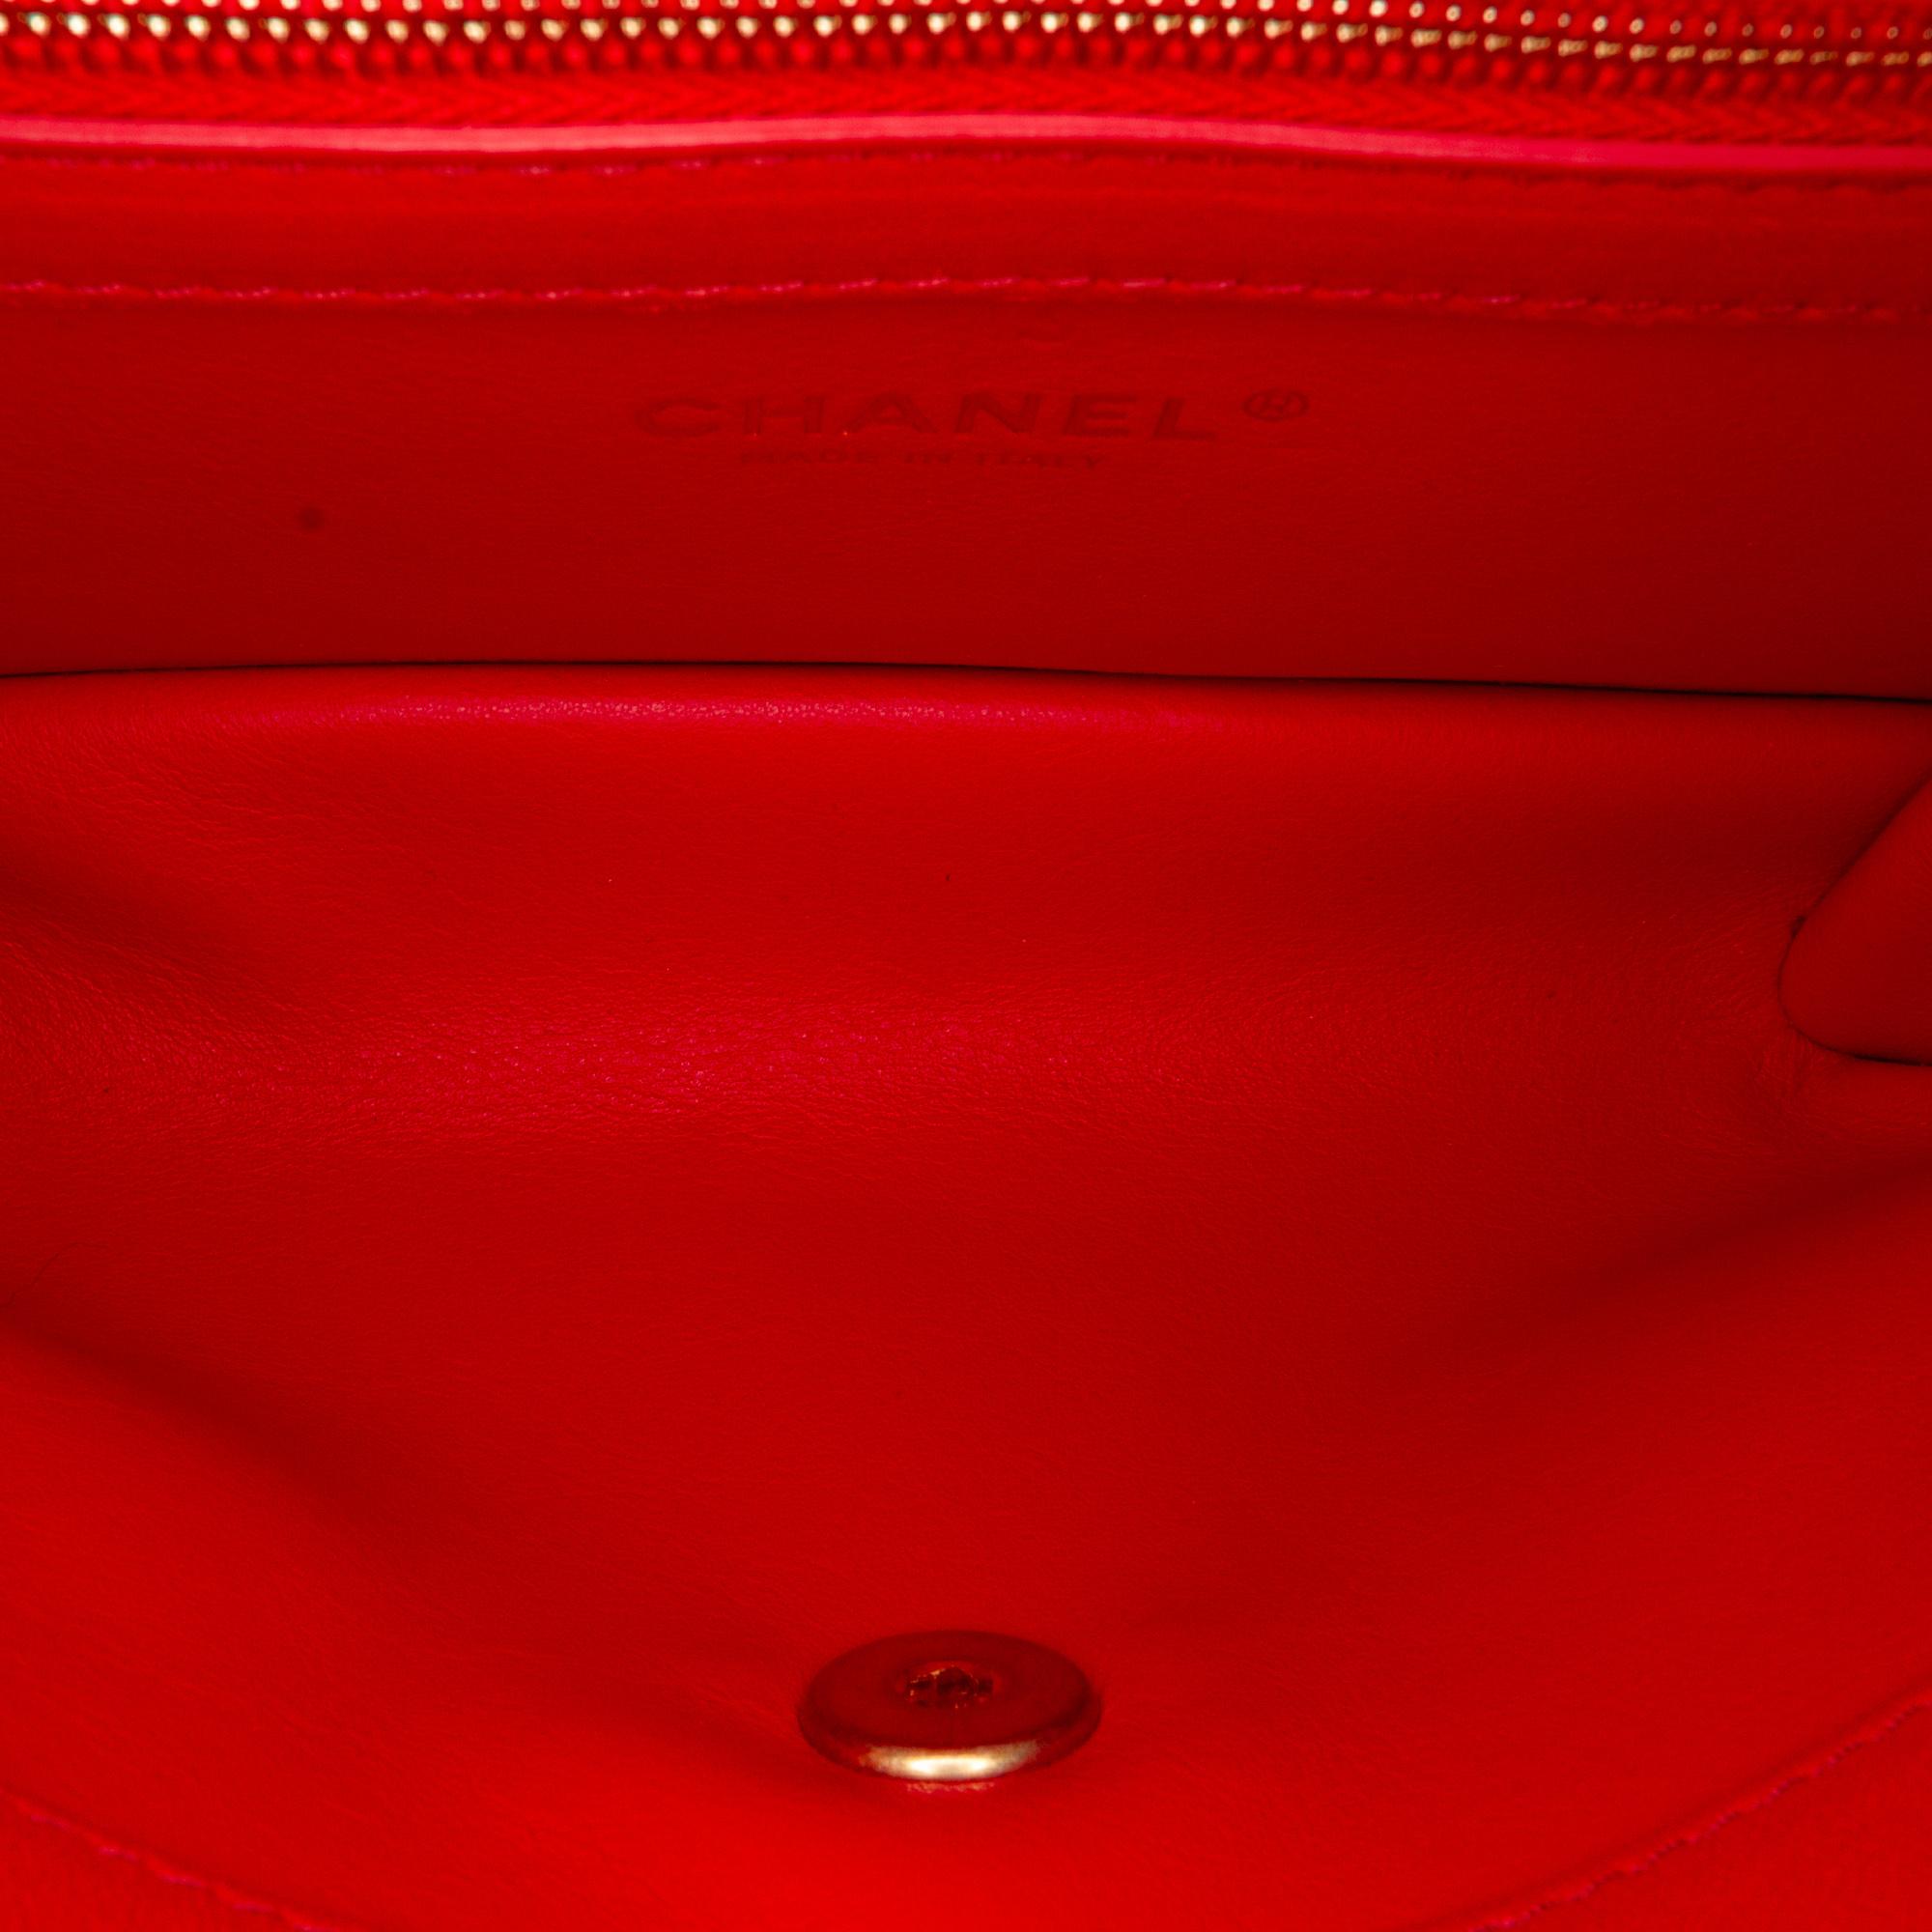 Chanel Red Small Coco Luxe Flap Satchel